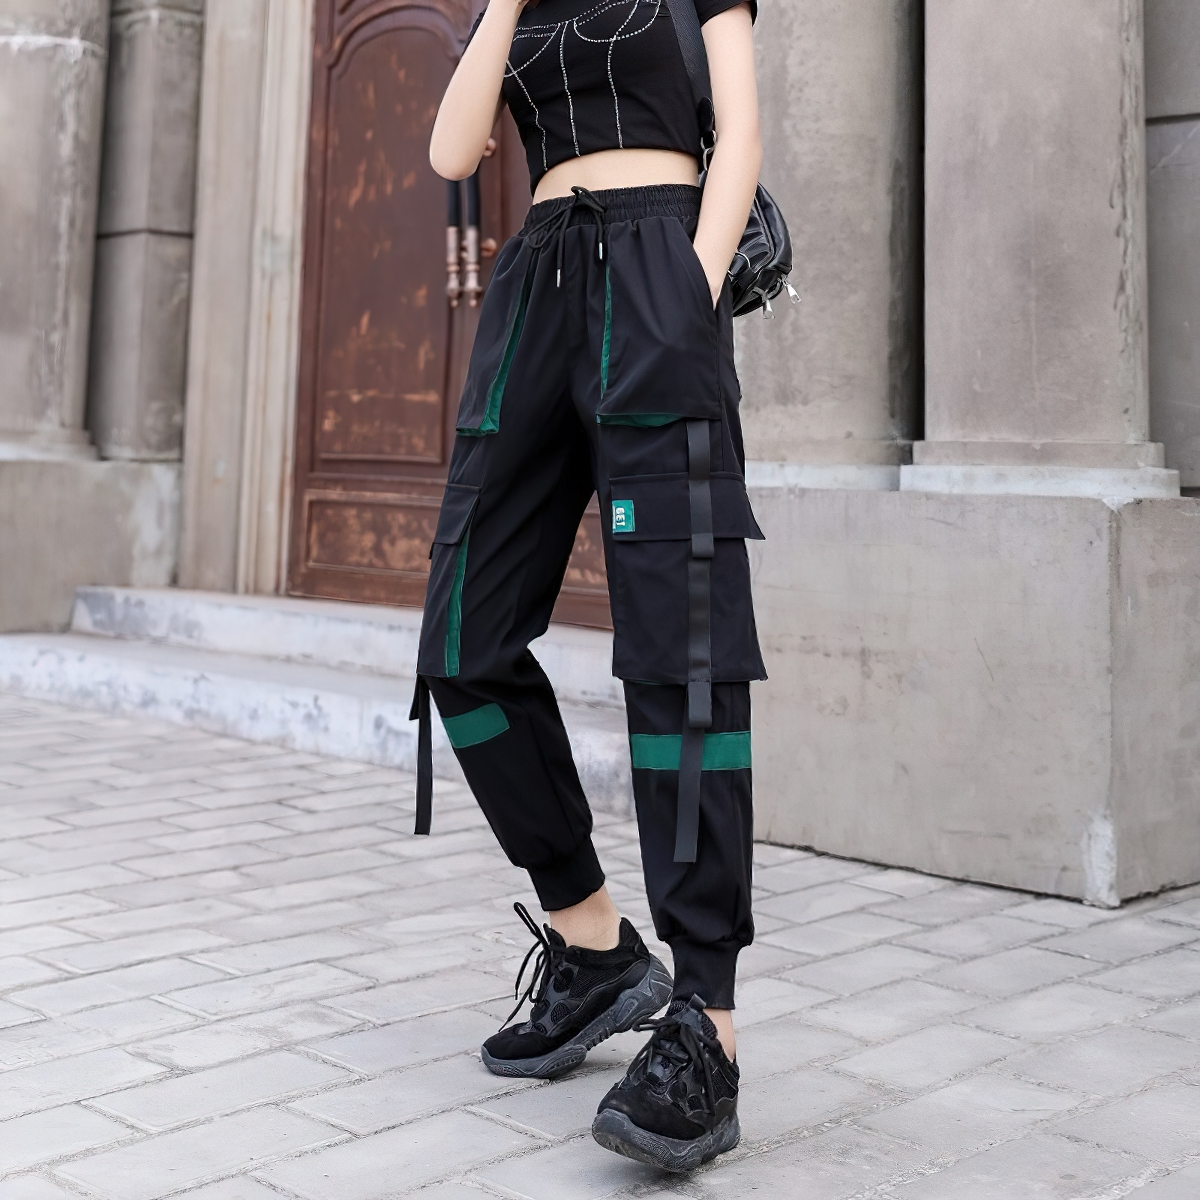 Fashion Women's Pants with High Waist / Casual Cargo pants with Big Pockets - HARD'N'HEAVY